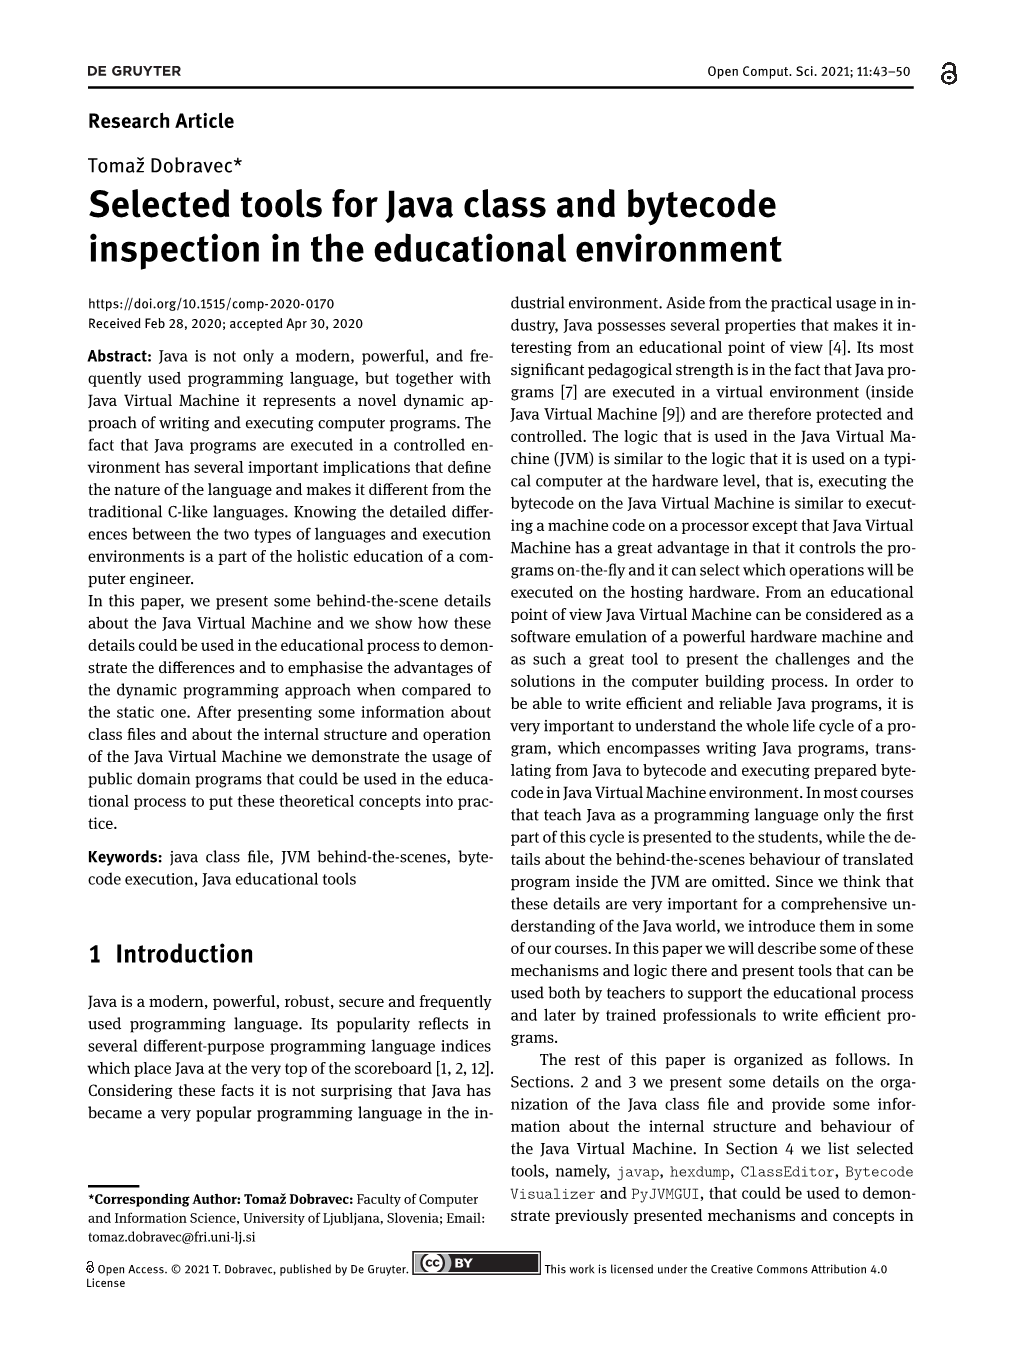 Selected Tools for Java Class and Bytecode Inspection in the Educational Environment Dustrial Environment